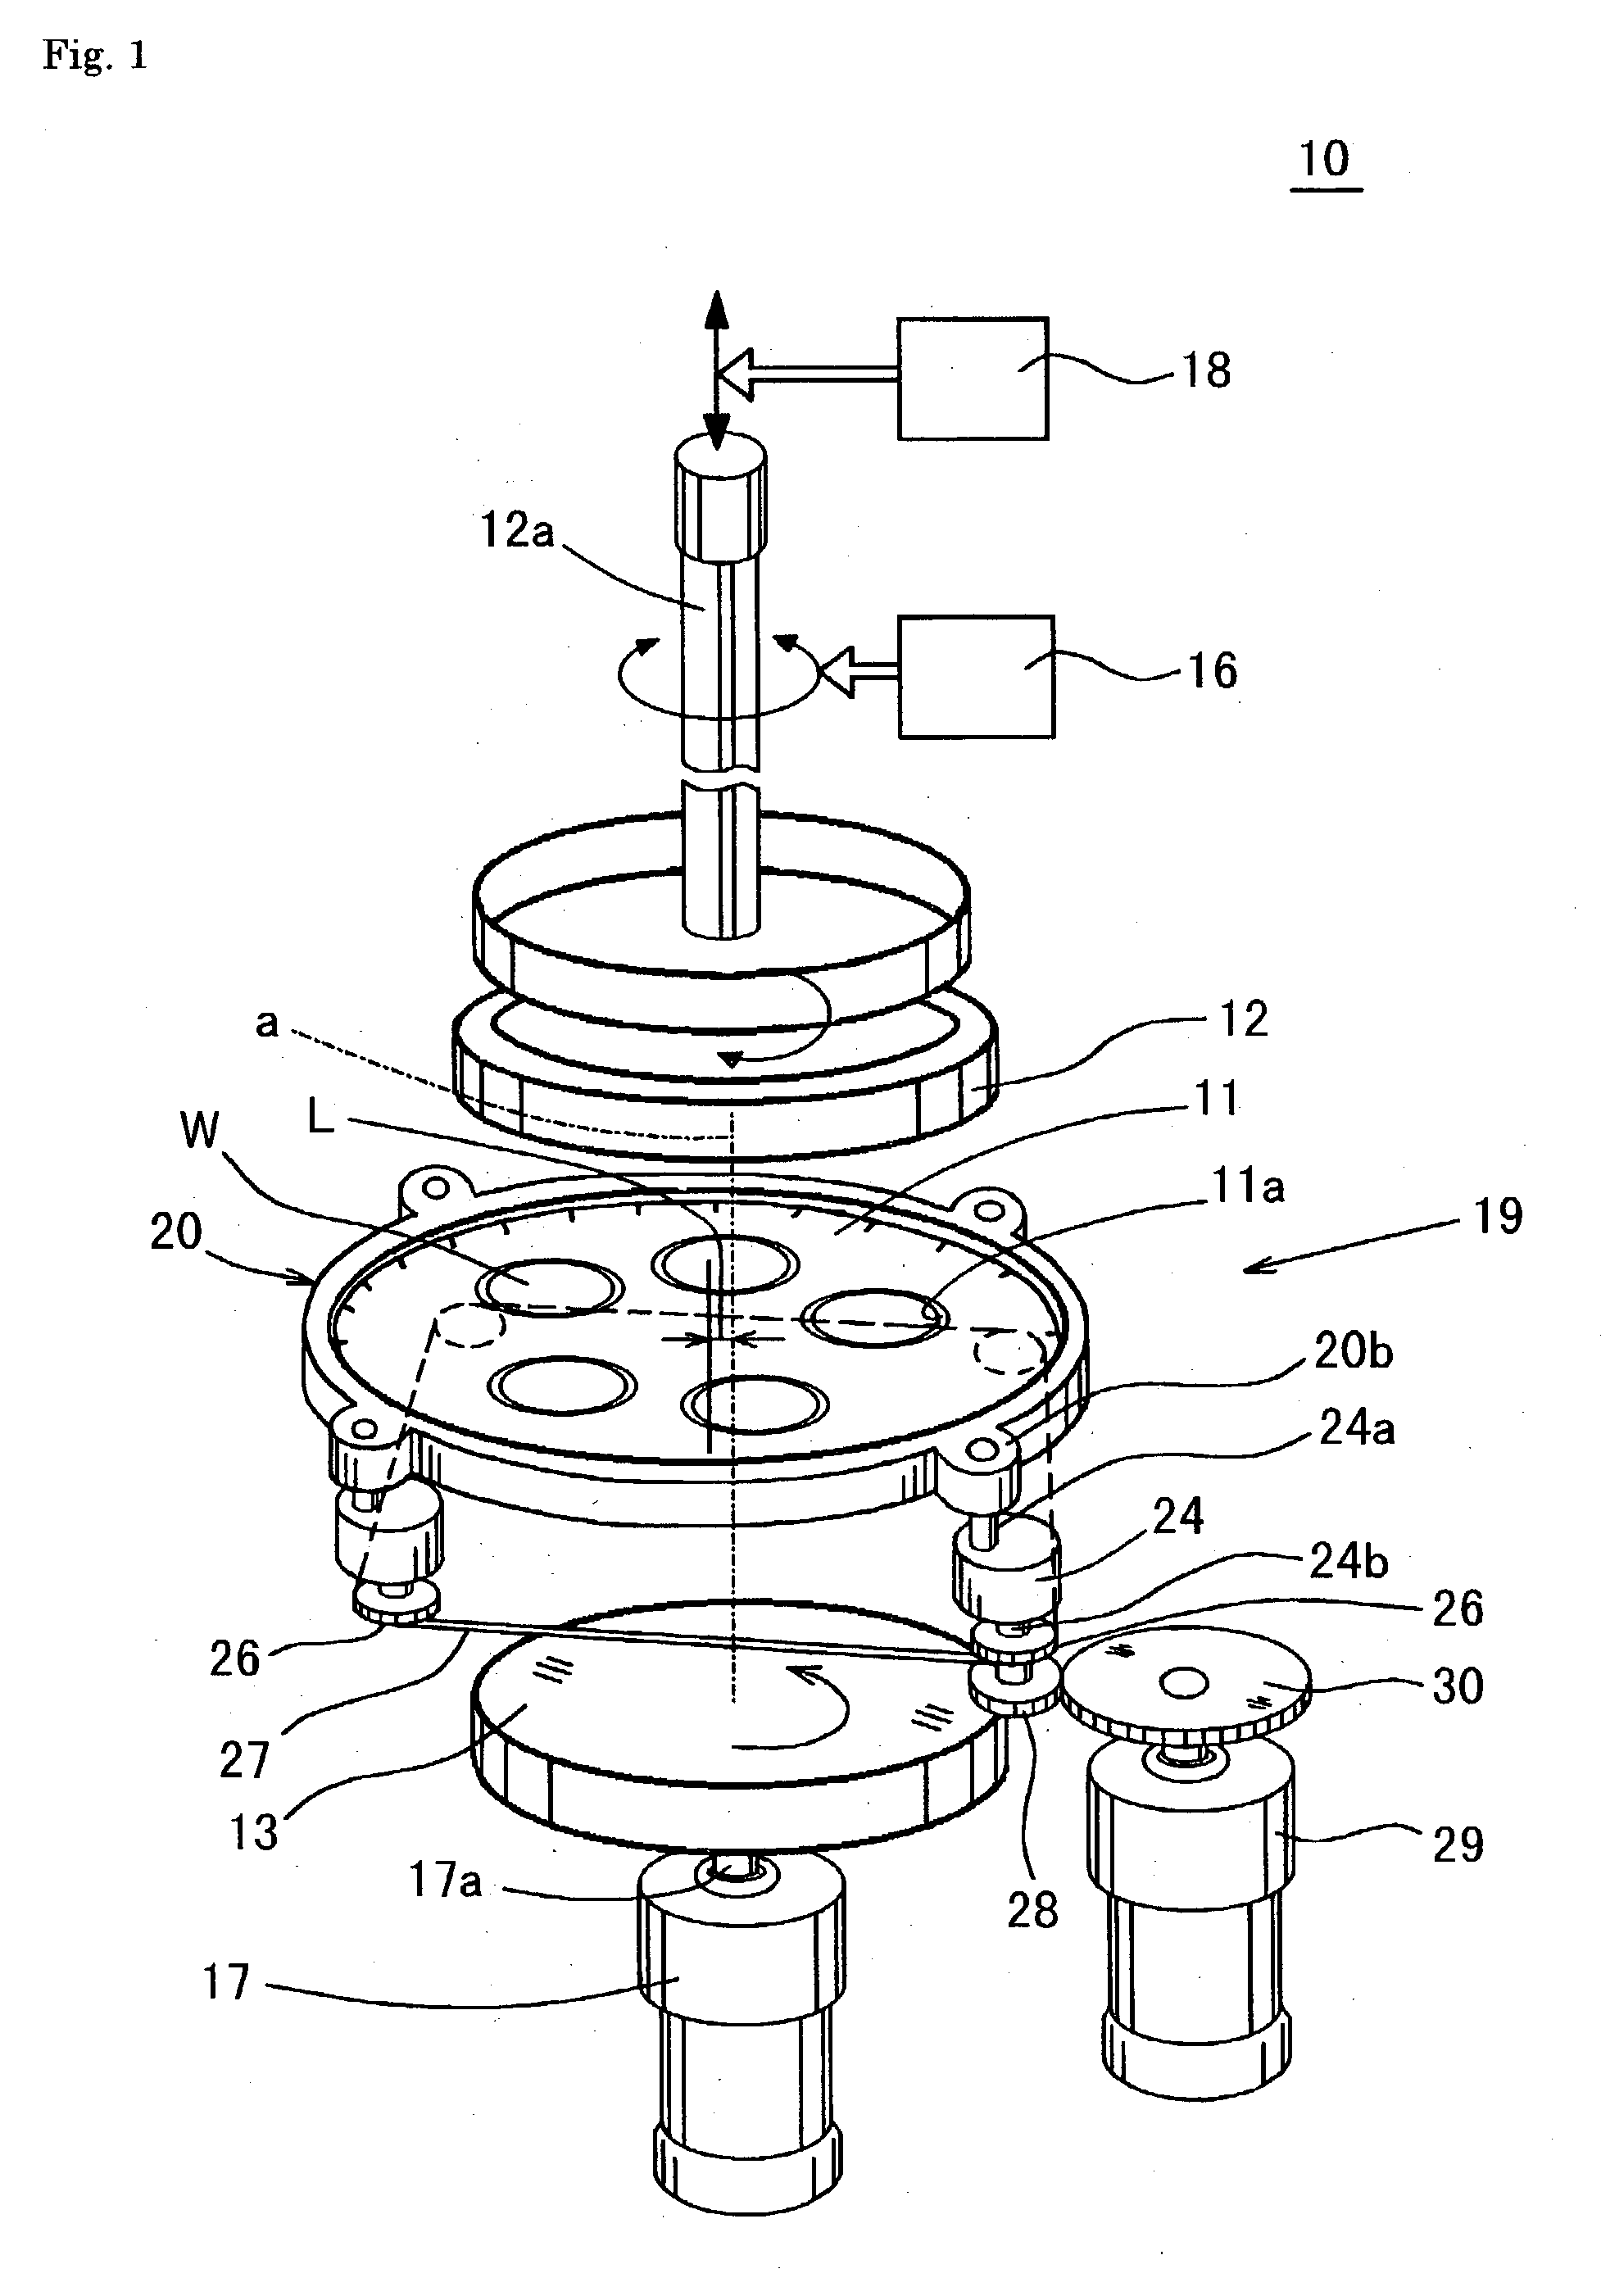 Method of manufacturing semiconductor wafer